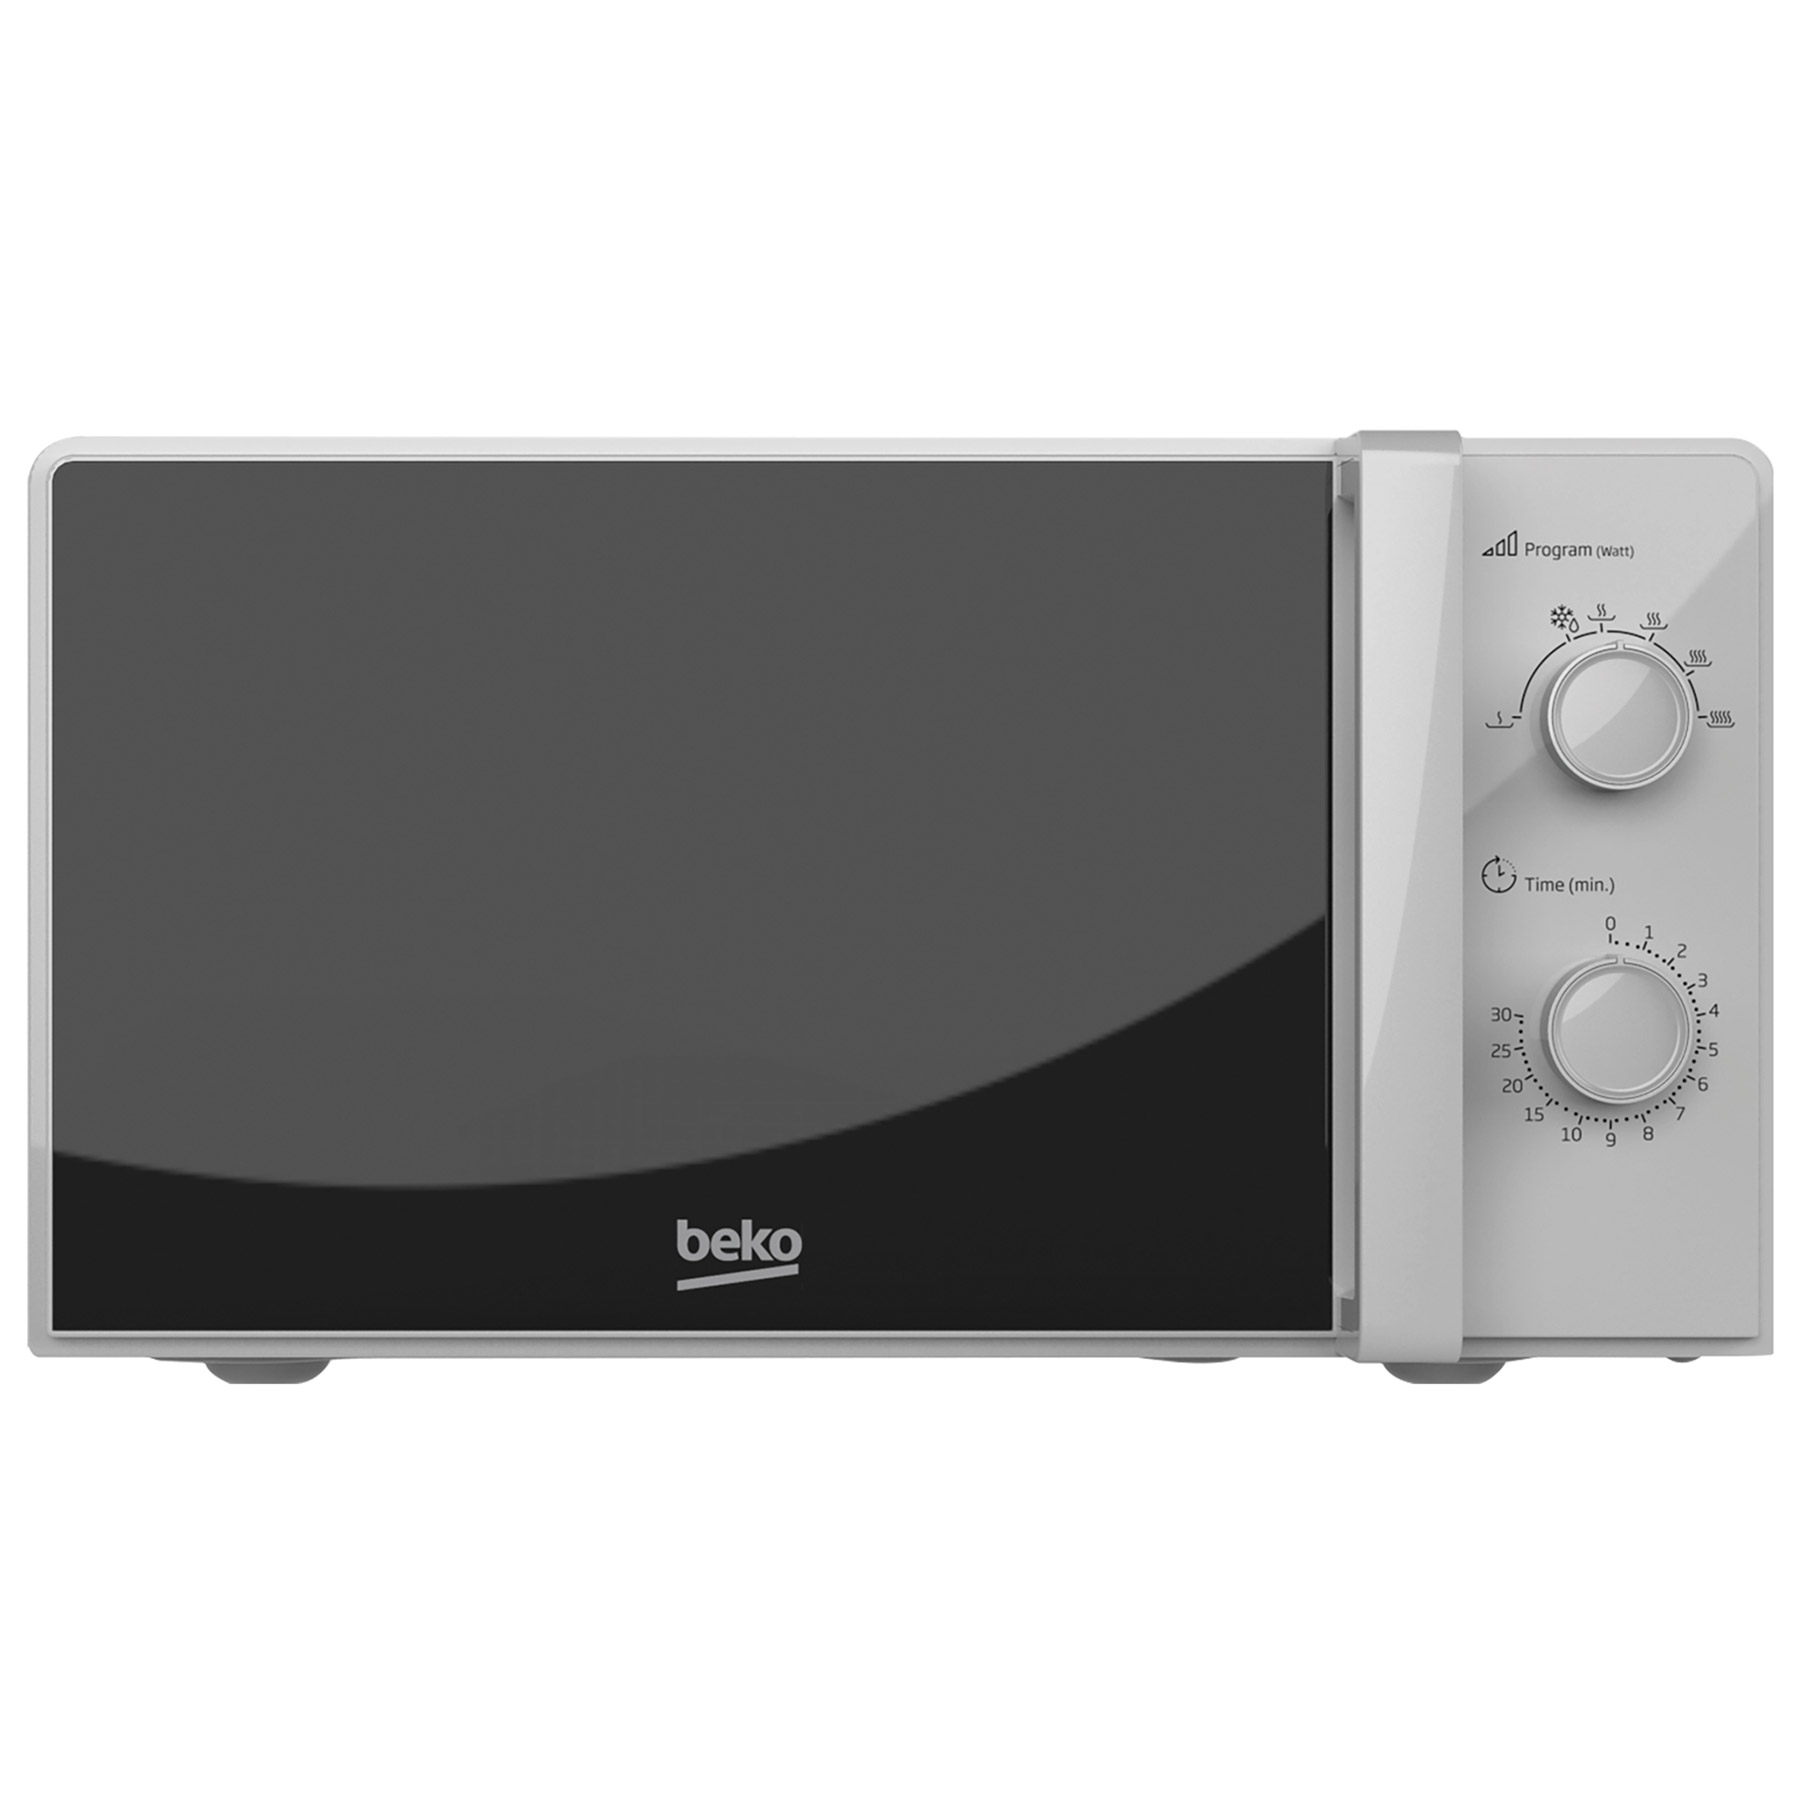 Image of Beko MOC20100SFB Microwave Oven in Silver 20L 700W Manual Control